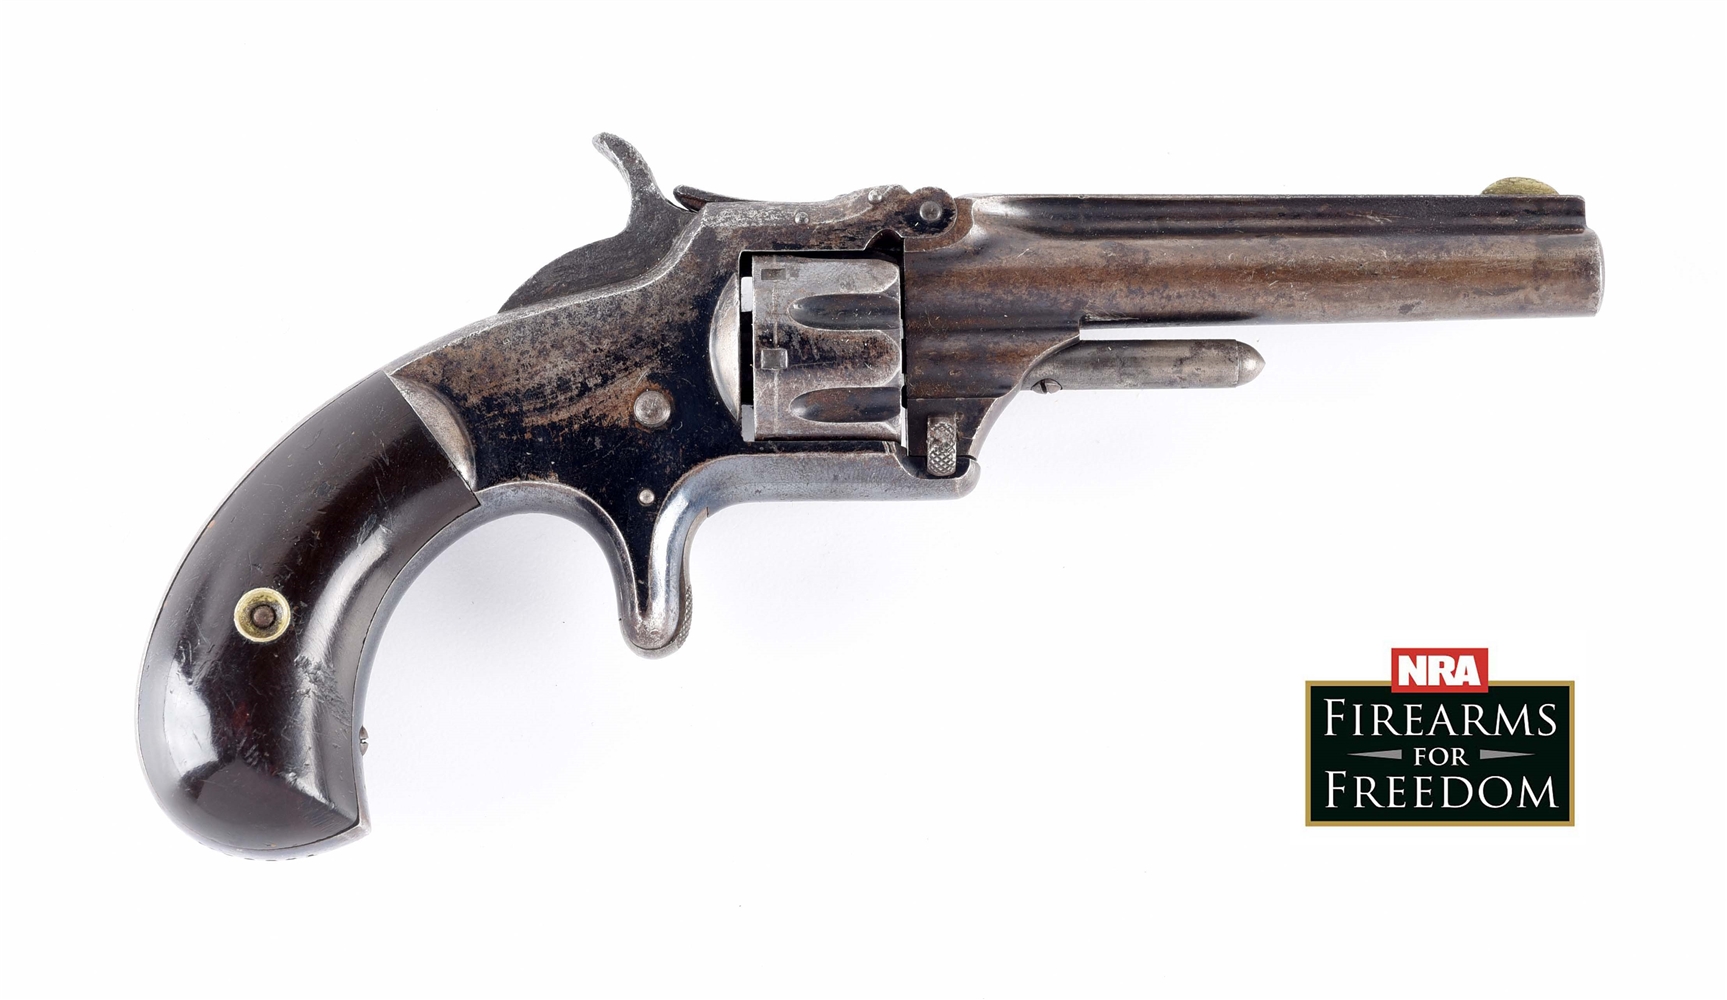 (A) SMITH & WESSON NO. 1 3RD ISSUE REVOLVER.